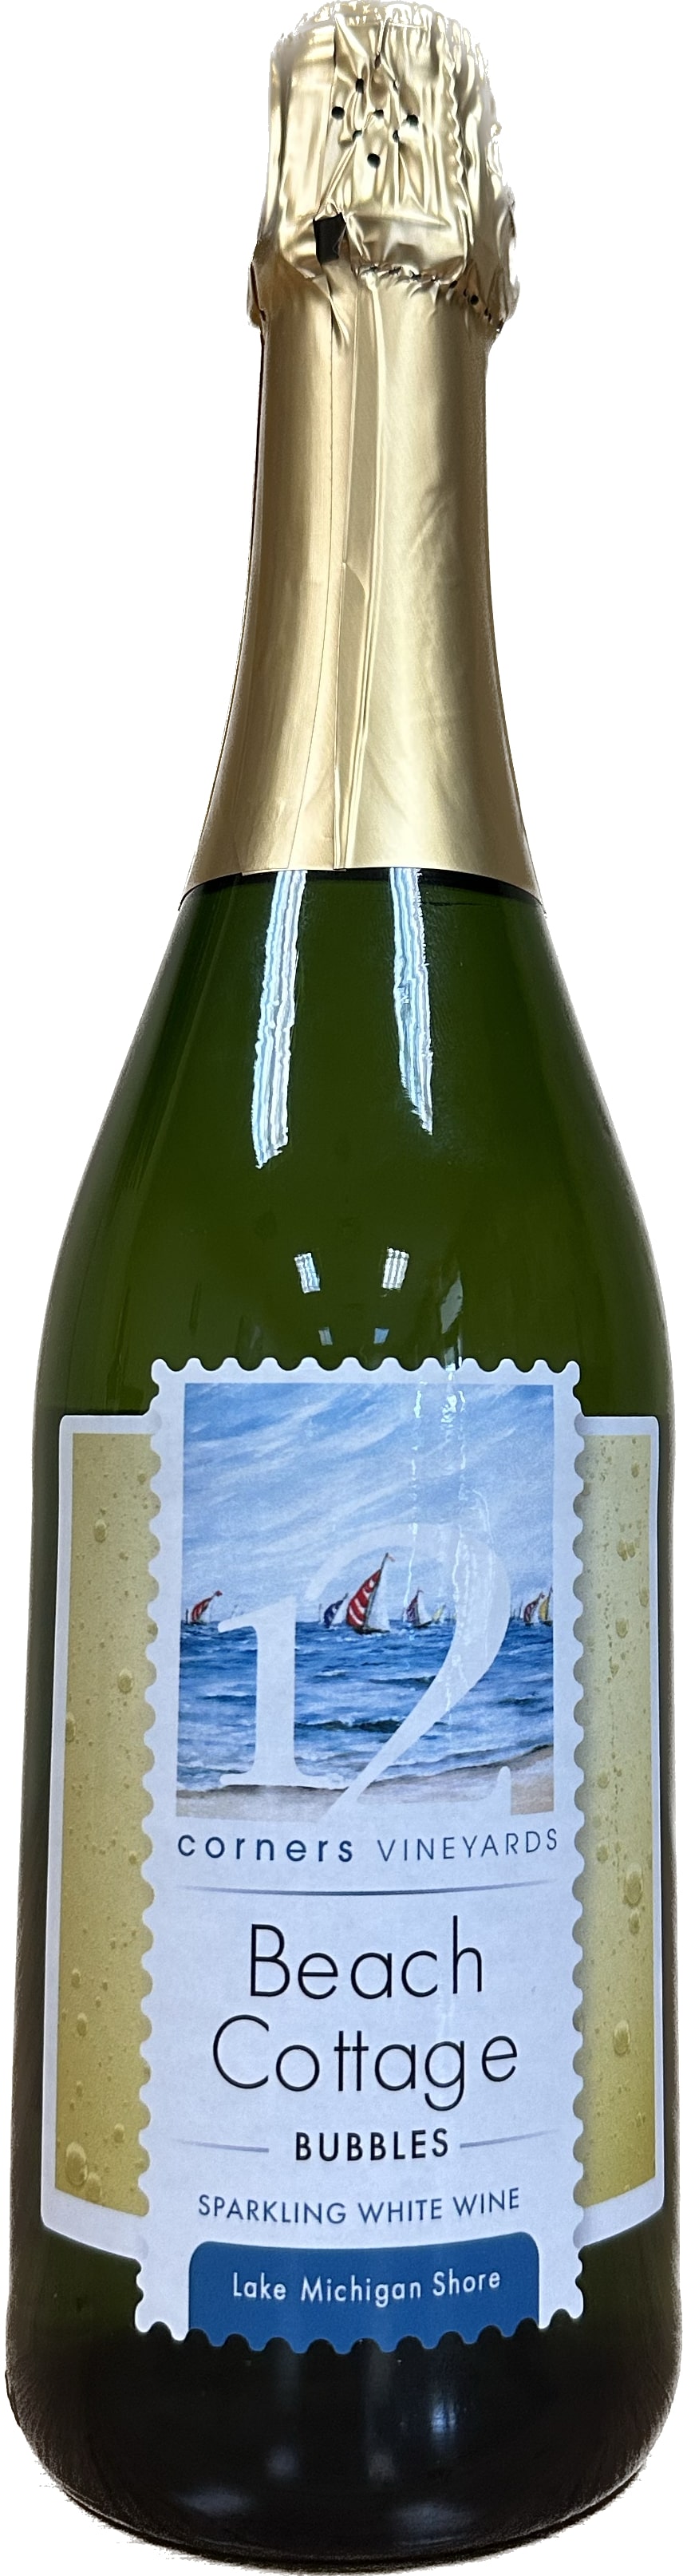 Product Image for Beach Cottage Bubbles Sparkling White Wine